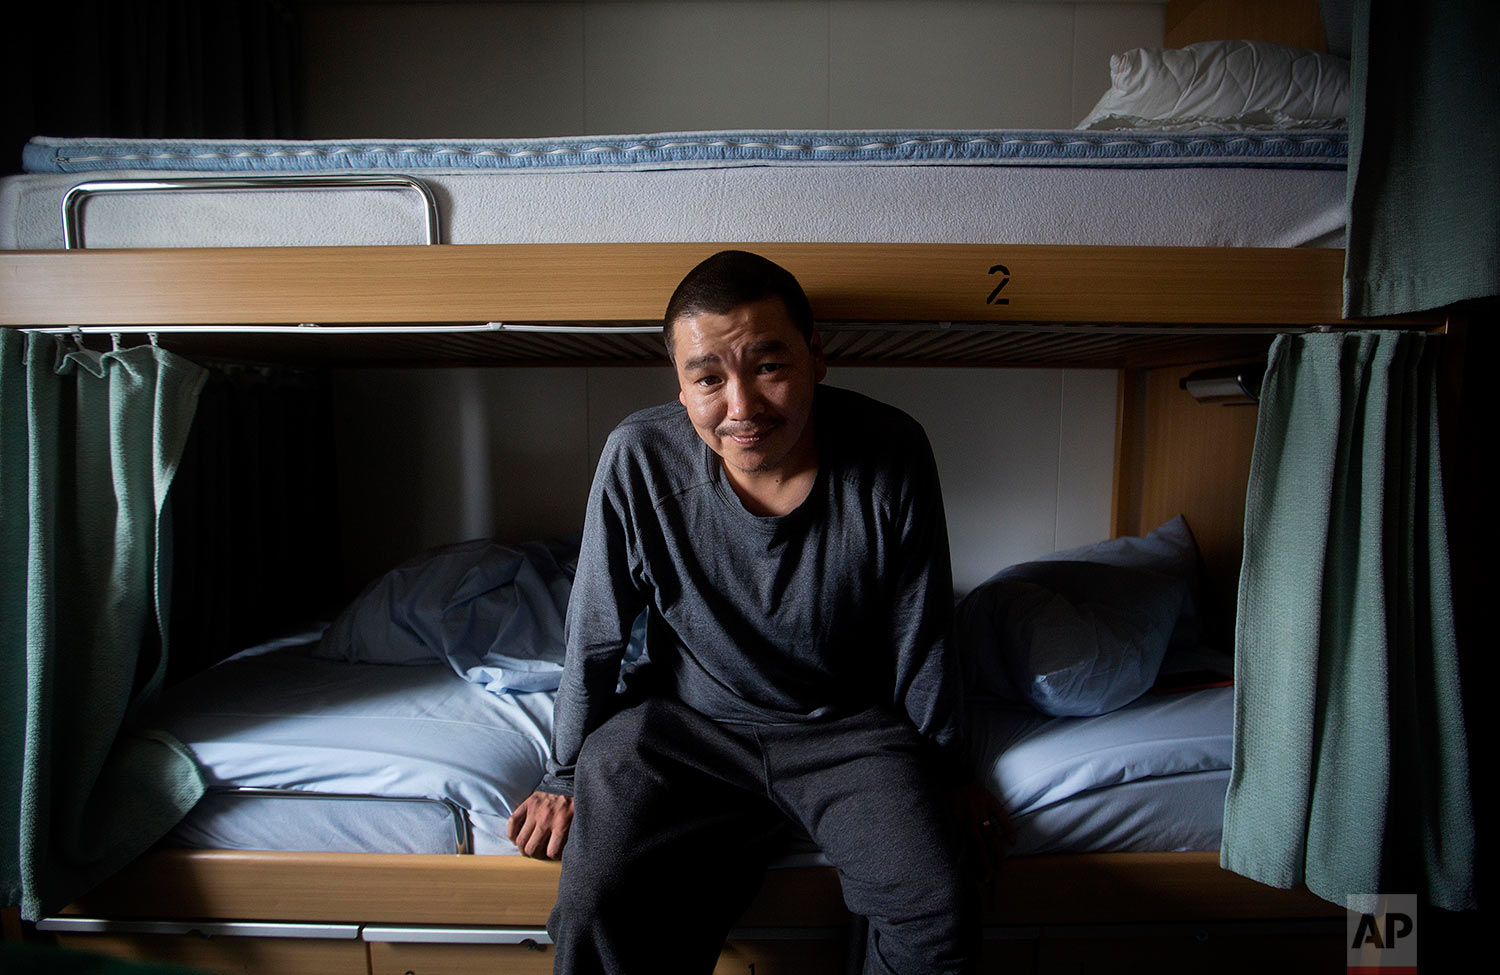  Trainee Maatiusi Manning, 33, of Cape Dorset, Nunavut, in Canada's northern territories, sits for a portrait on his bunk while resting from sea sickness aboard the Finnish icebreaker MSV Nordica as sails in the North Pacific Ocean toward the Bering 